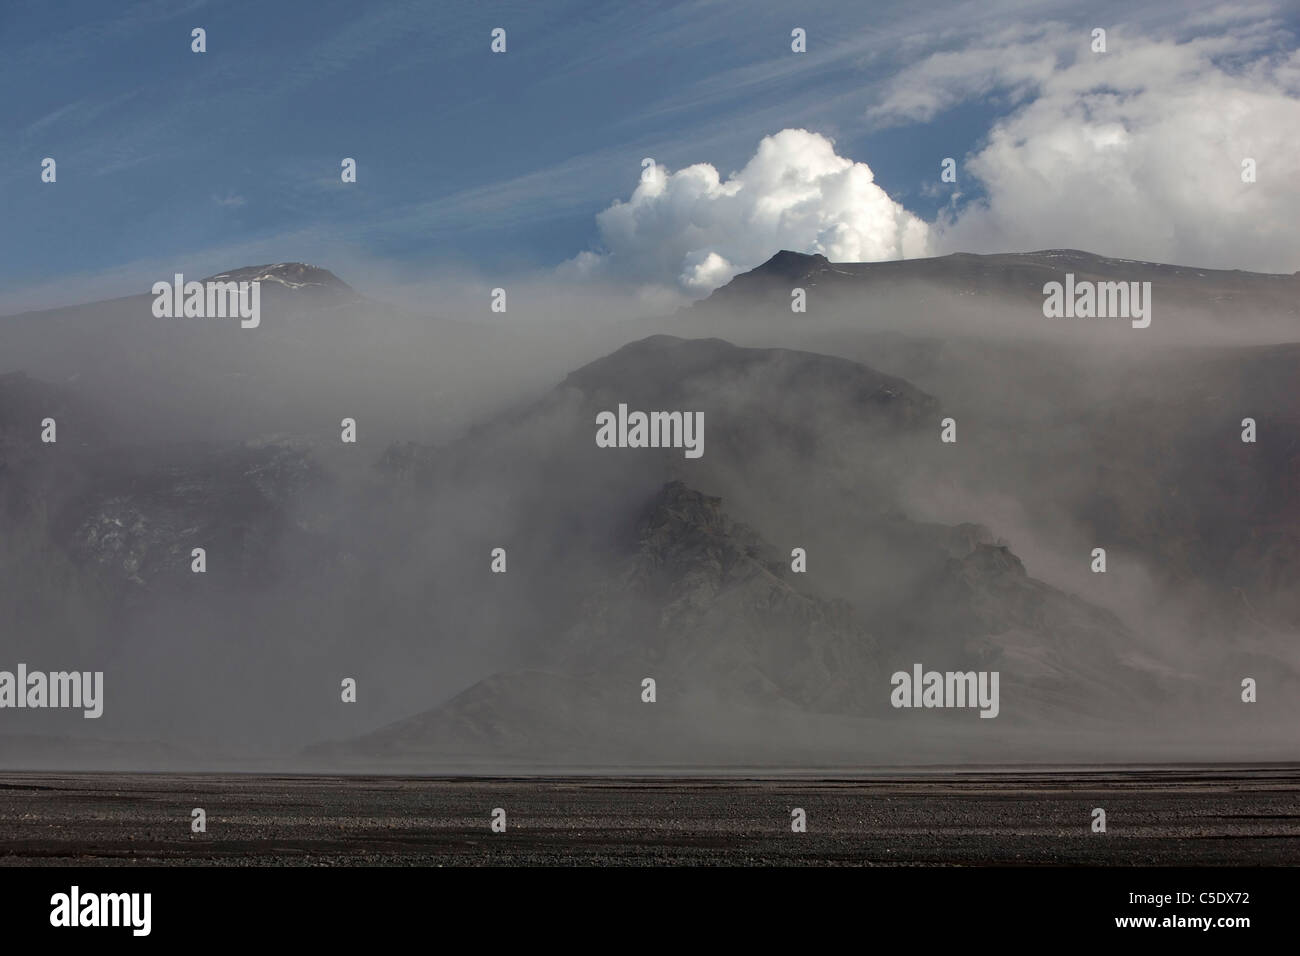 Remote landscape with eruption area of Eyjafjallajokull volcano in the background at Iceland Stock Photo